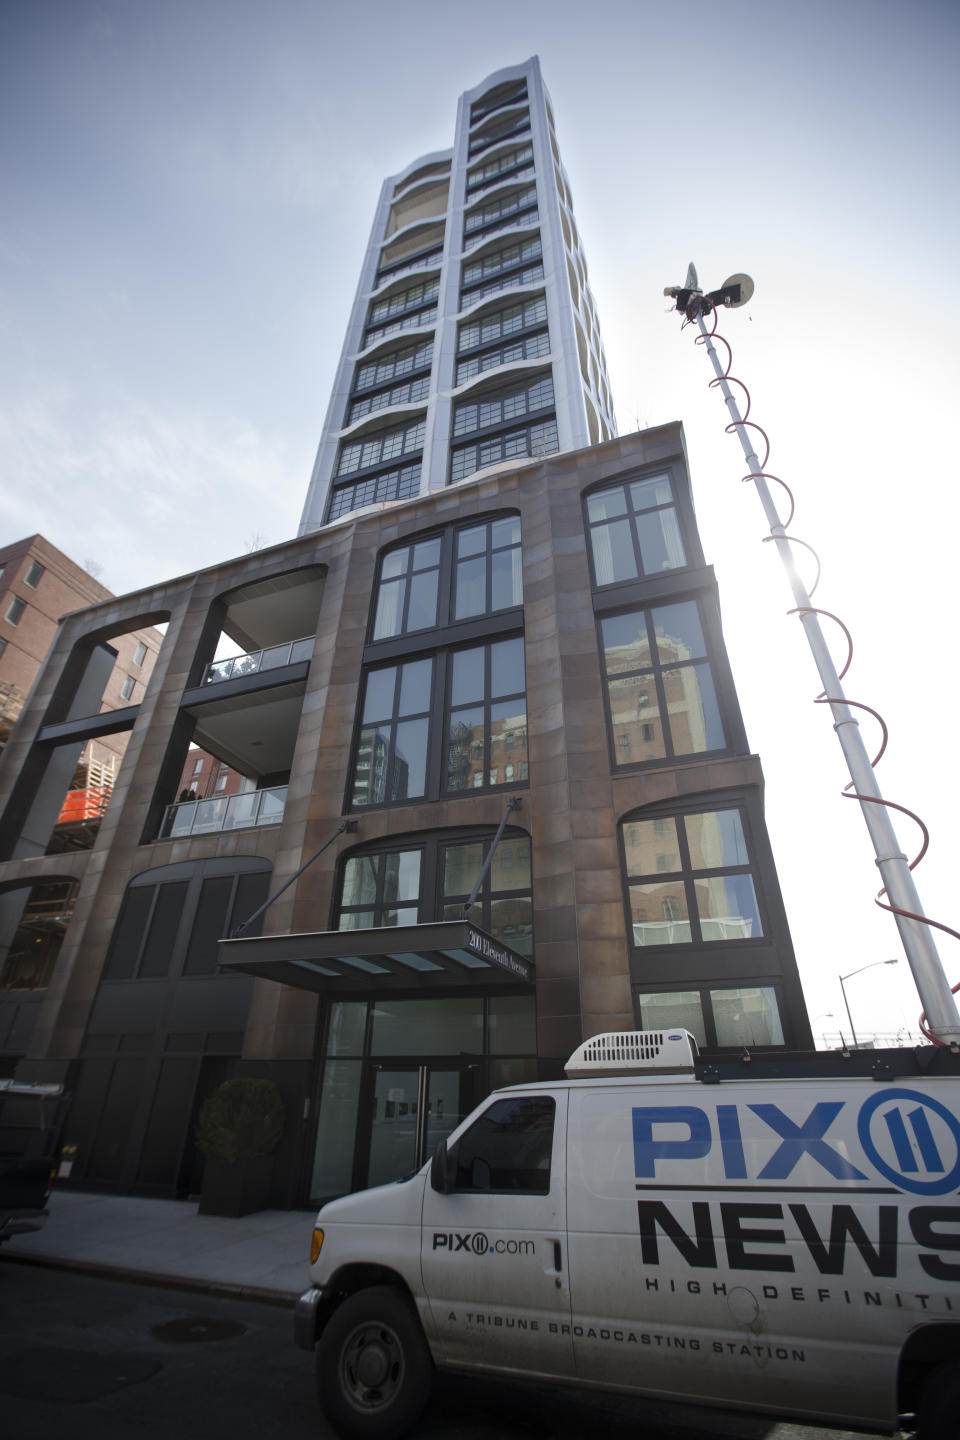 A news van is parked outside a building where the body of fashion designer L'Wren Scott was found, Monday, March 17, 2014, in New York. Scott, who was Mick Jagger's girlfriend, was found dead of a possible suicide, a law enforcement official said Monday. (AP Photo/John Minchillo)